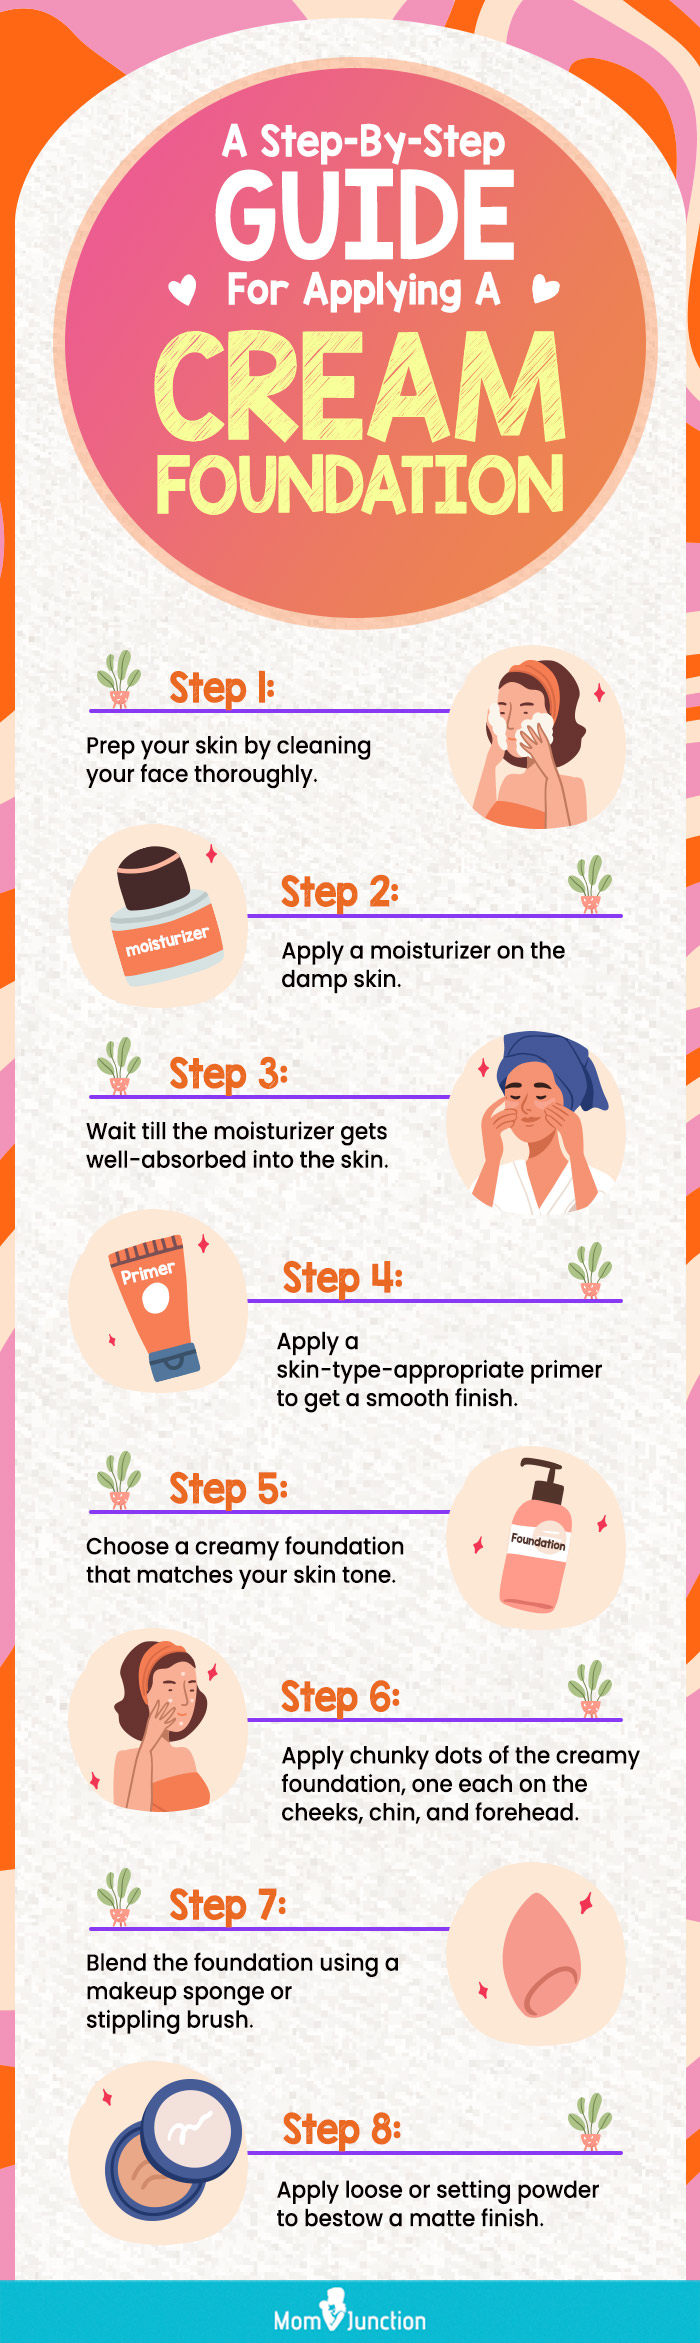 A Step By Step Guide For Applying A Cream Foundation (infographic)